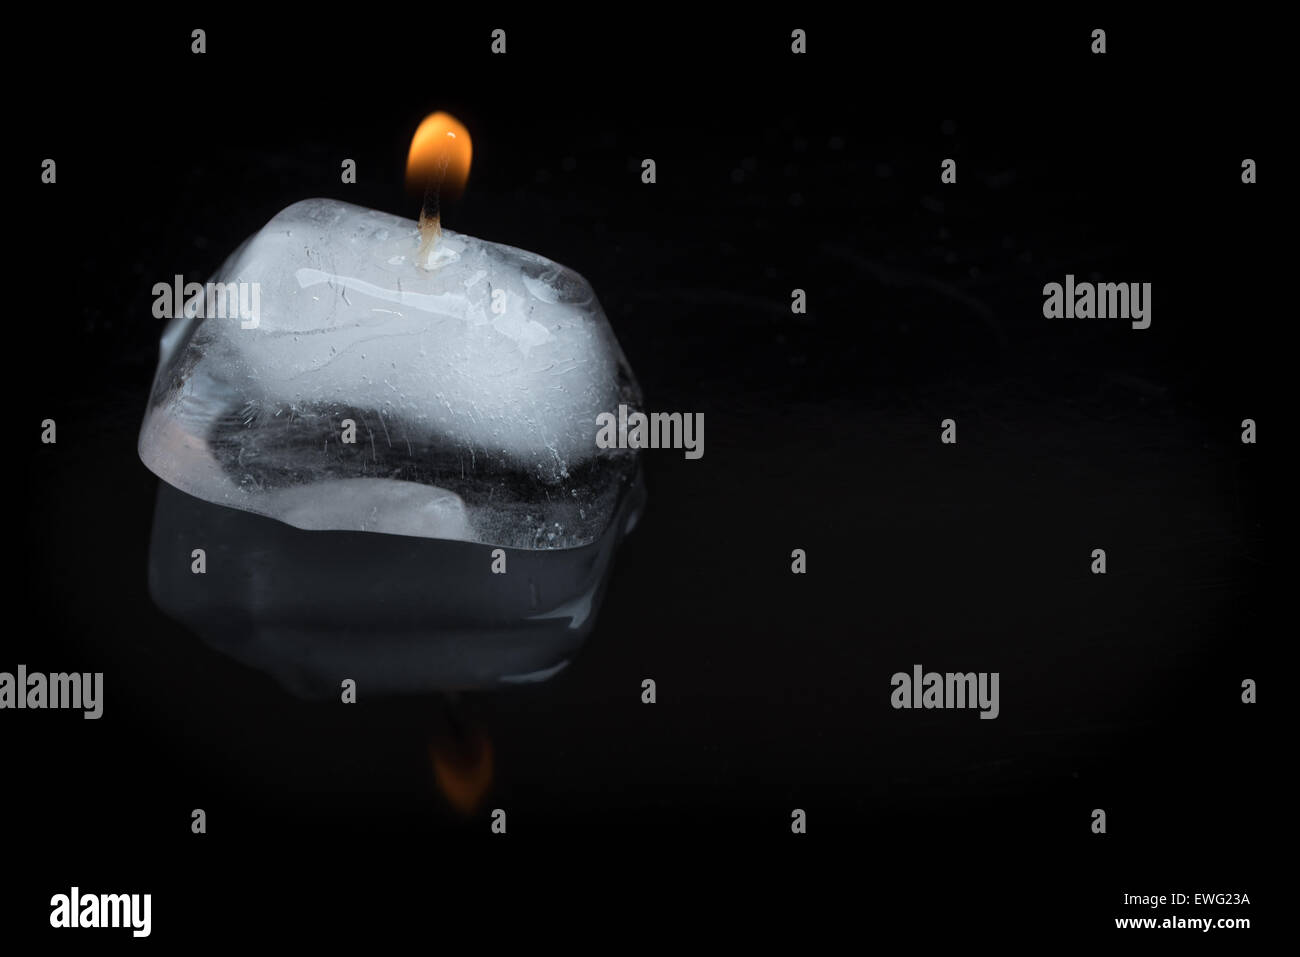 A close up shot of a lit candle wick stuck into an ice cube on a black background with reflection. Stock Photo